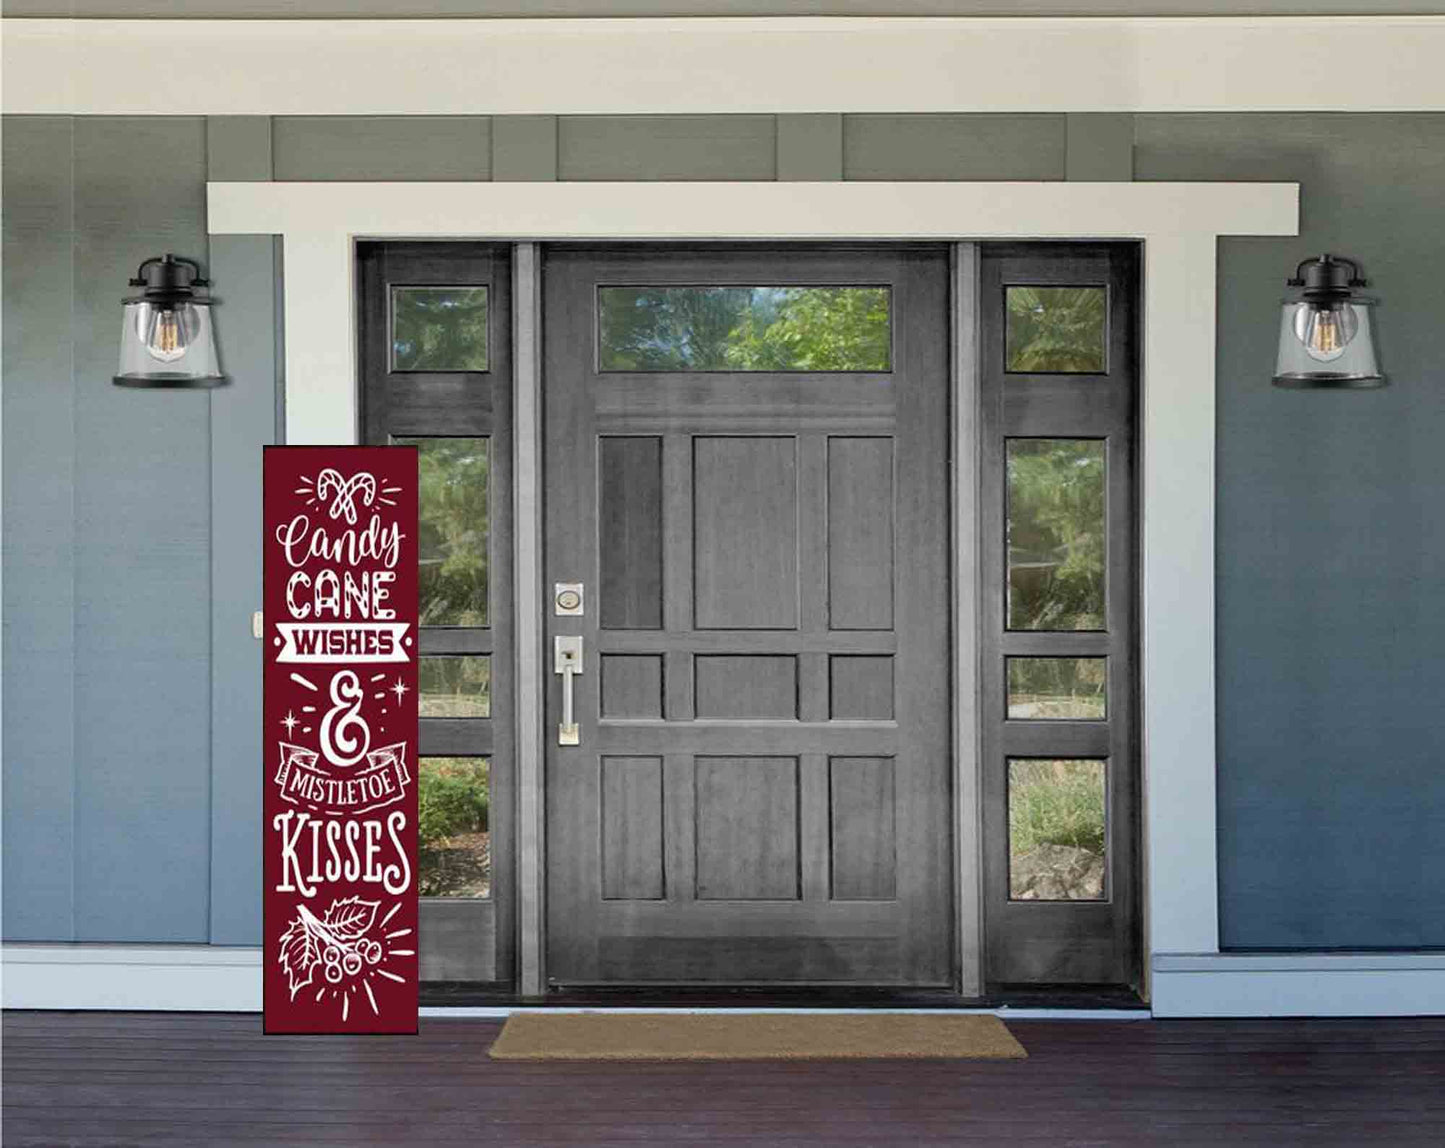 Candy Cane Wishes Welcome Sign | Front Door Decor | Entry Way Wall Decor | Welcome Sign I Porch Leaner I Holiday Season